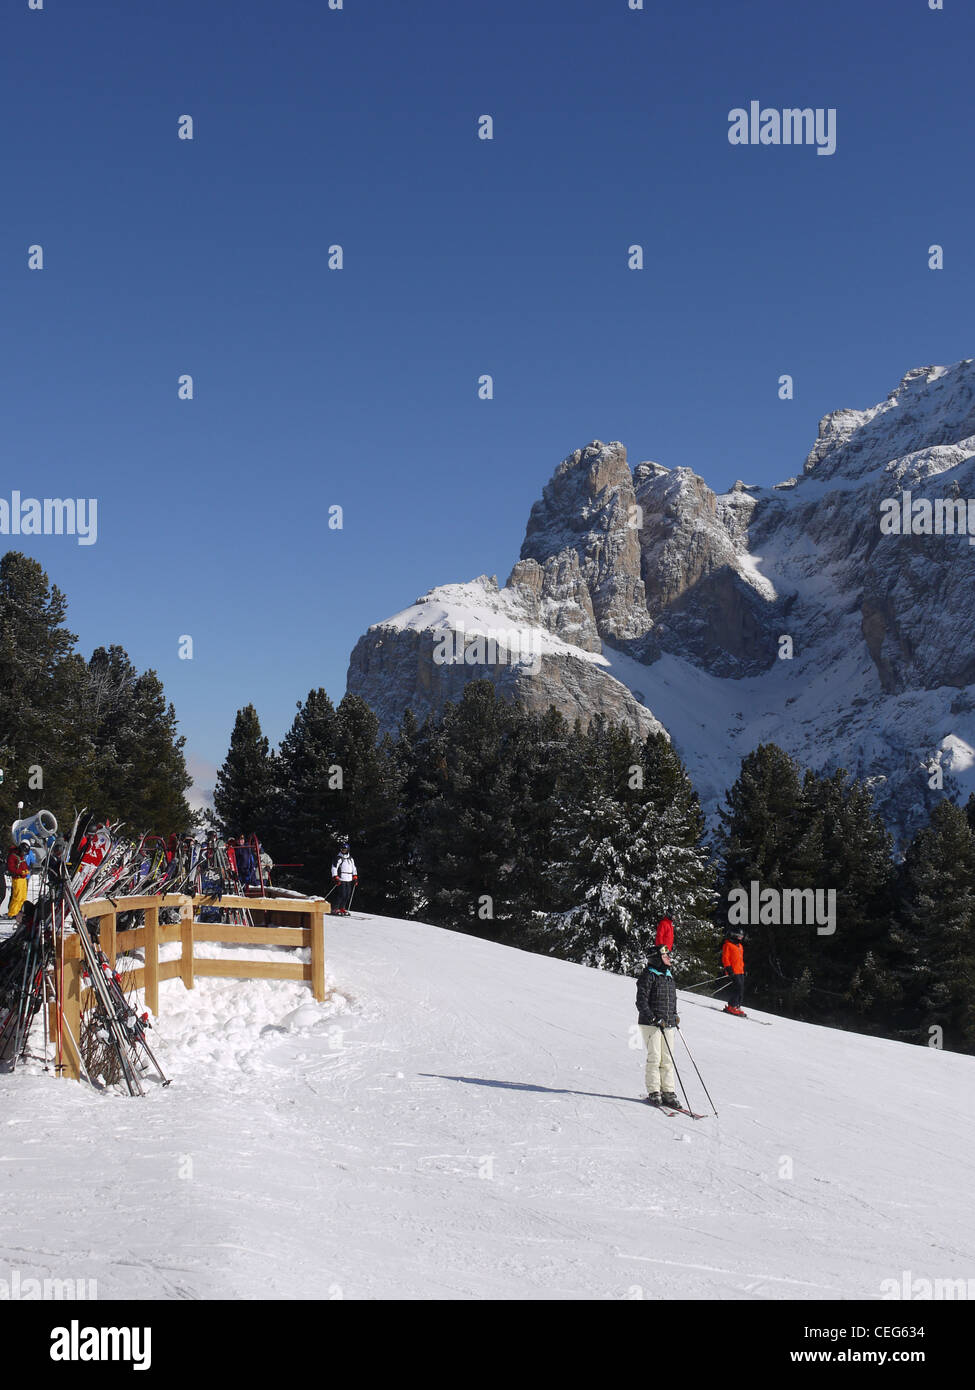 The Sellaronda is a ski route that loops around the massif of the Sella mountain range, of the Dolomites in Italy. Stock Photo